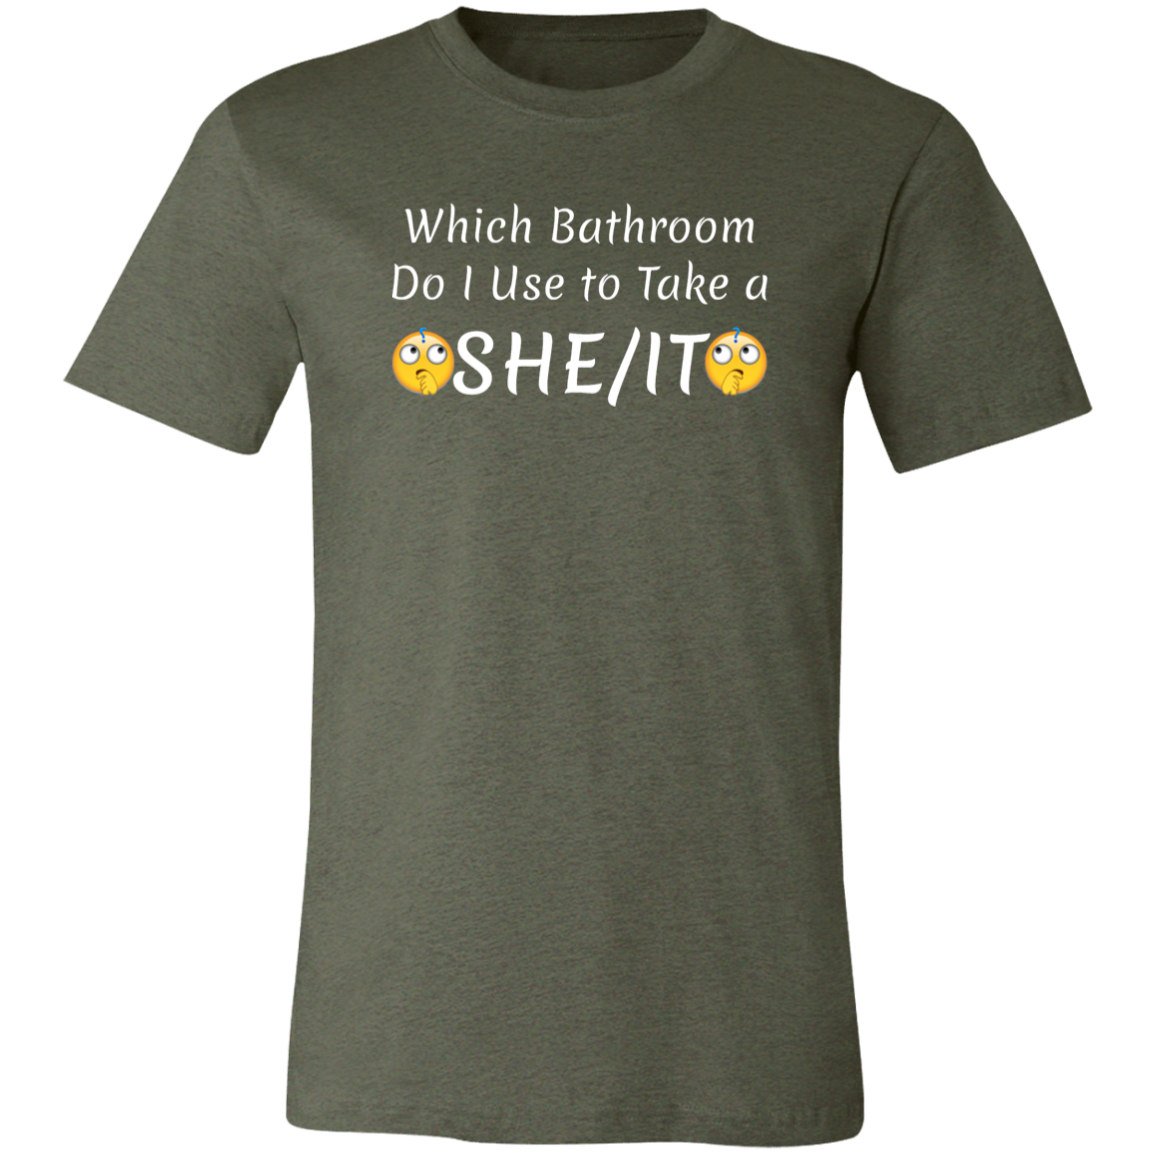 Which Bathroom... Jersey Short-Sleeve T-Shirt